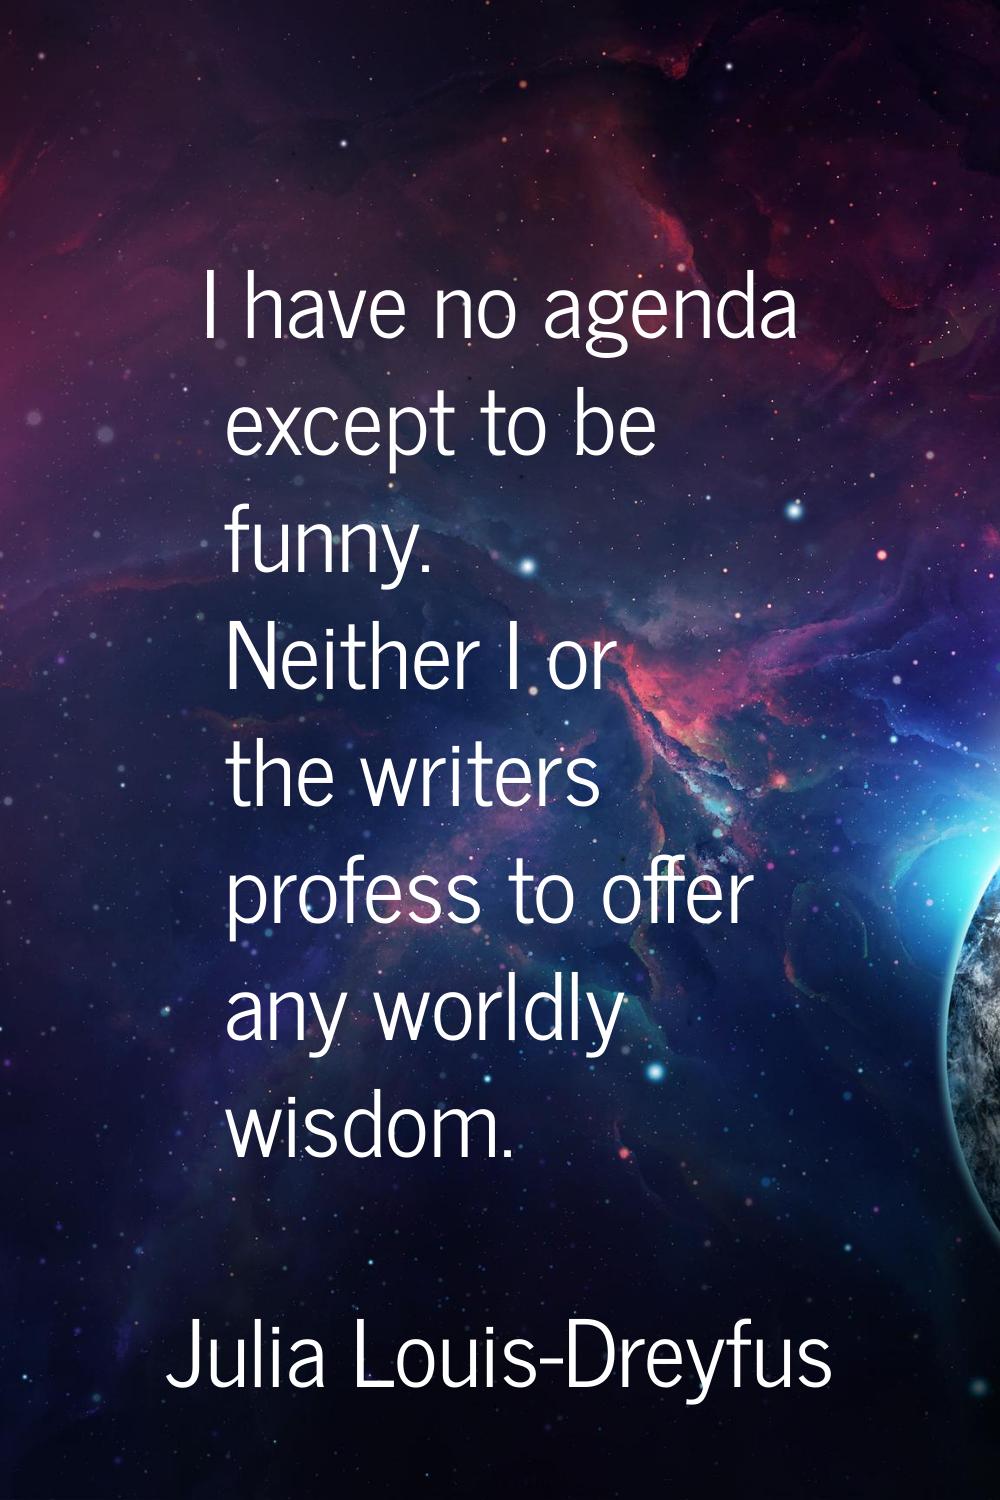 I have no agenda except to be funny. Neither I or the writers profess to offer any worldly wisdom.